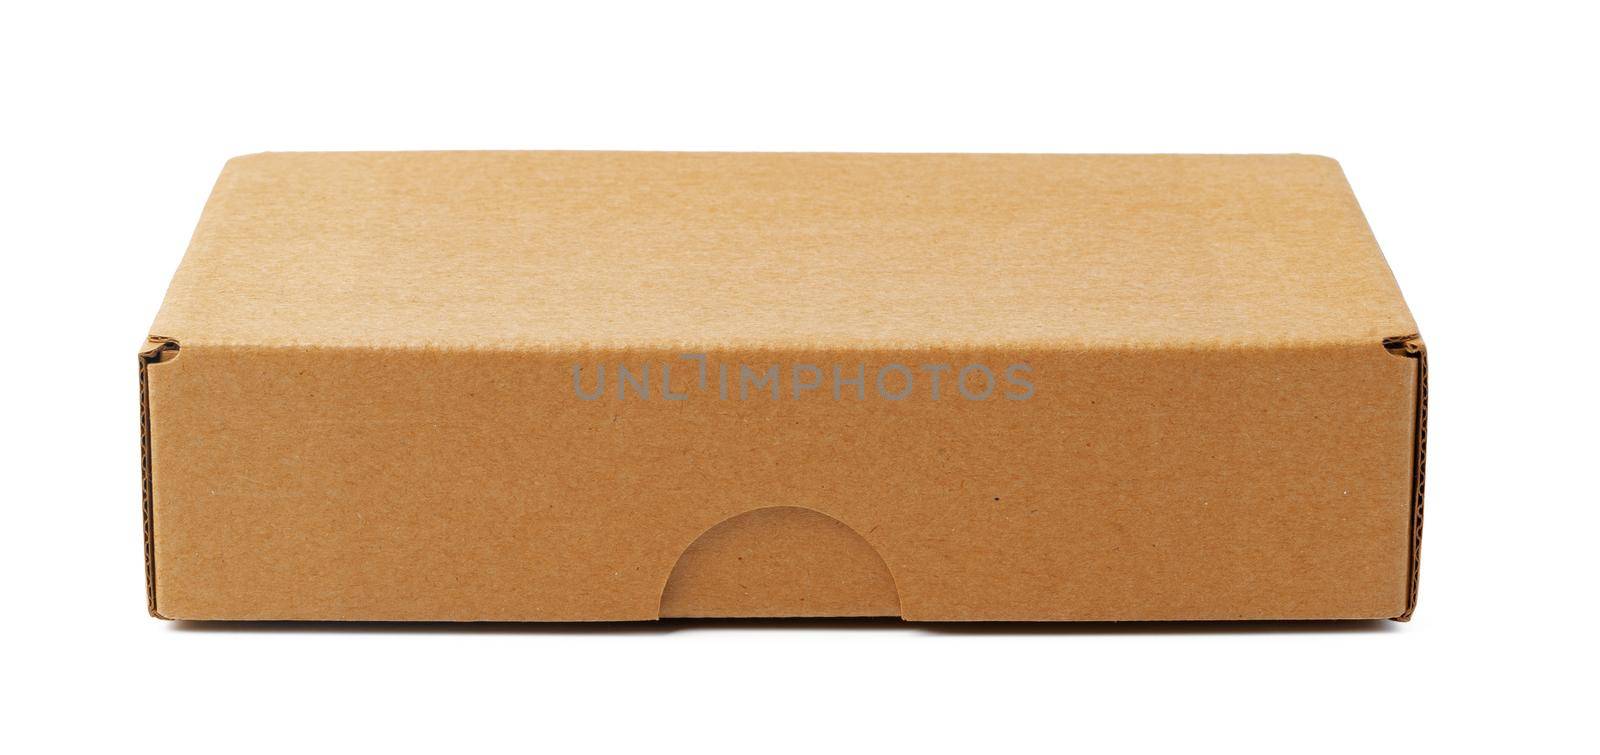 Craft cardboard boxes isolated on white background by Fabrikasimf